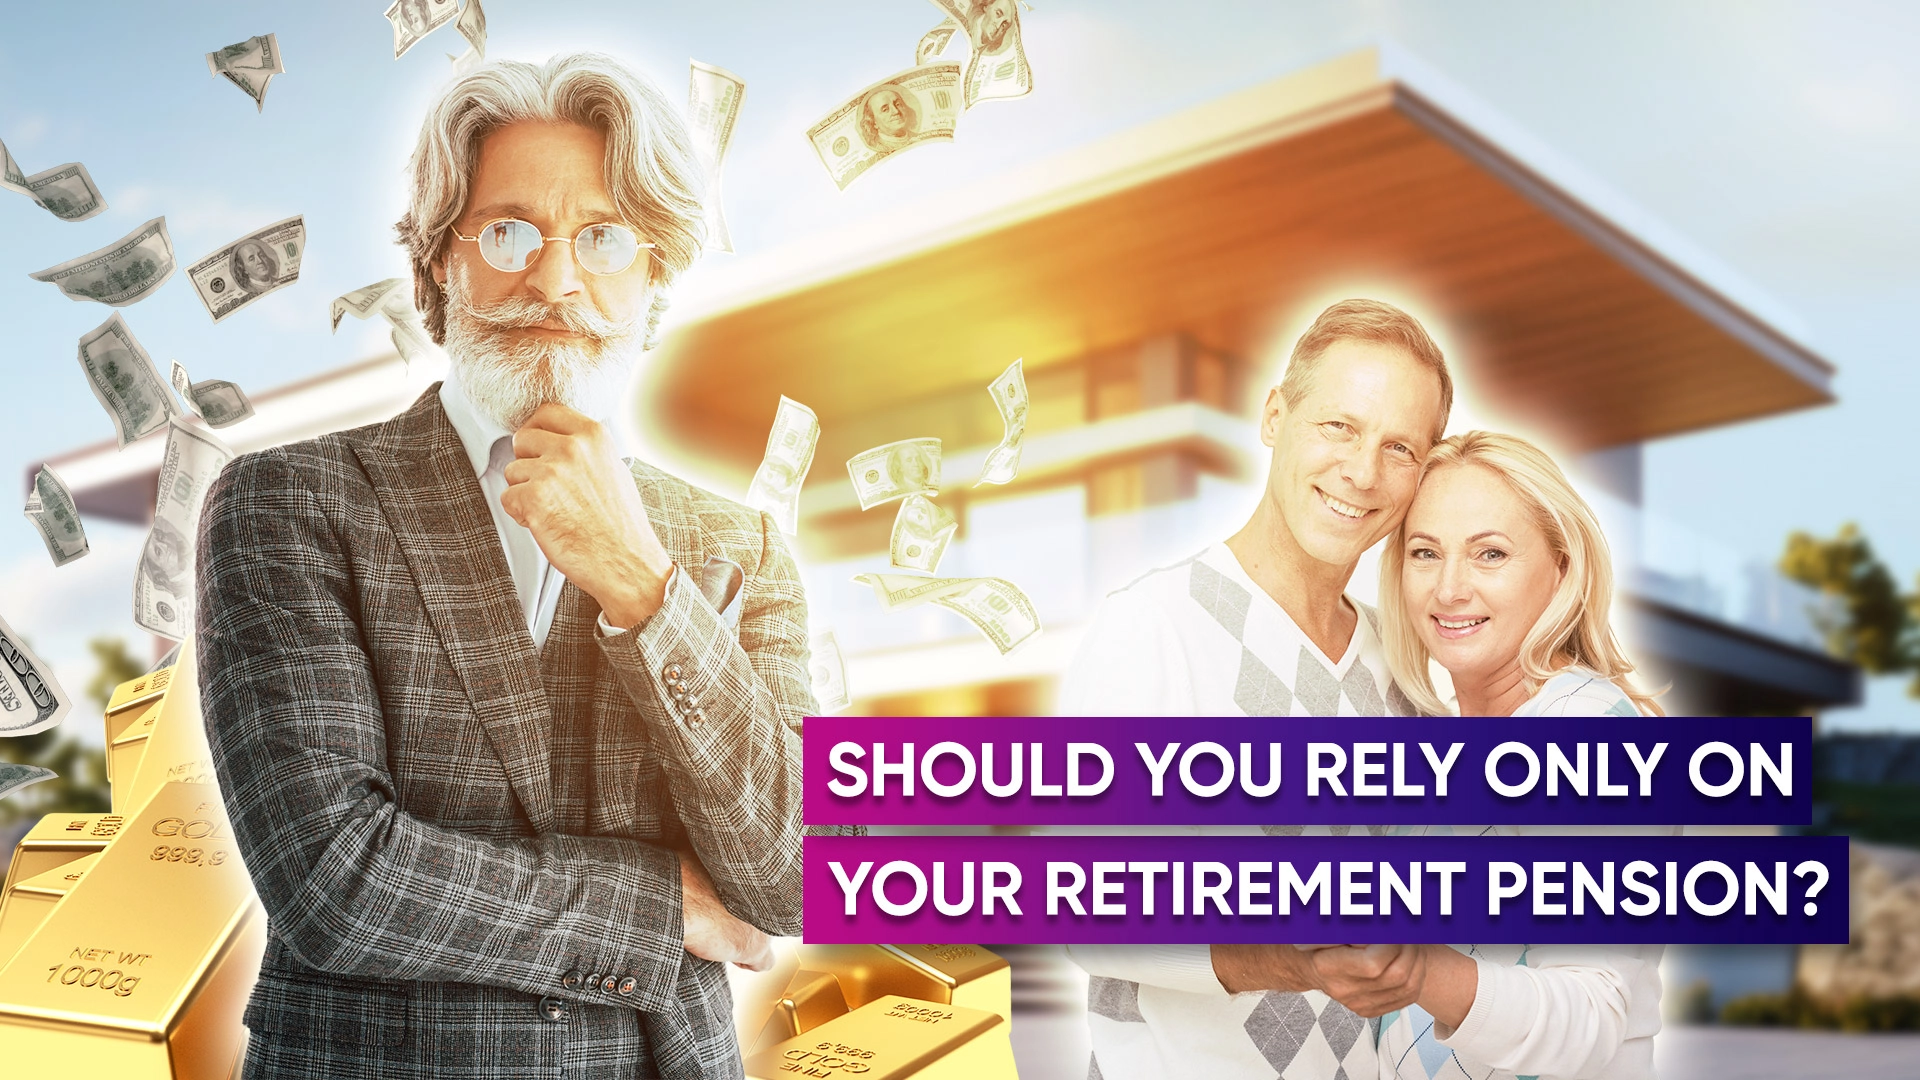 [VIDEO] Should you rely on a pension only?
